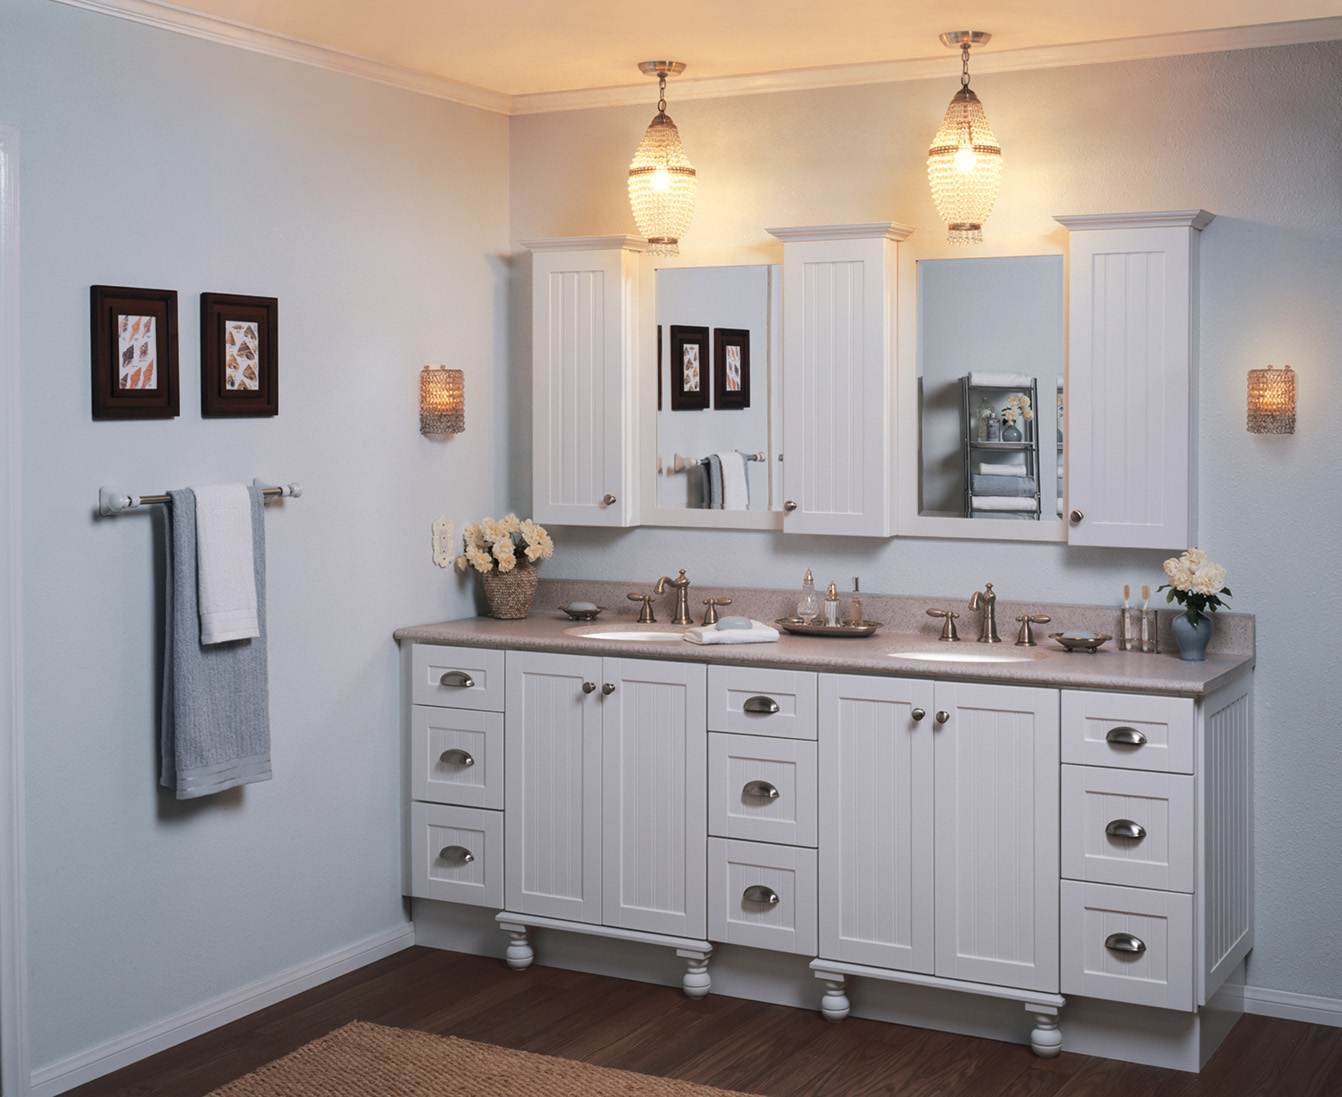 Vanity Decorated Color Bathroom Vanity Decorated With White Color Design Made From Wooden Material And Small Traditional Bathroom Pendant Lighting Bathroom Bathroom Pendant Lighting Fixtures With A Controllable Light Intensity With Your Shades